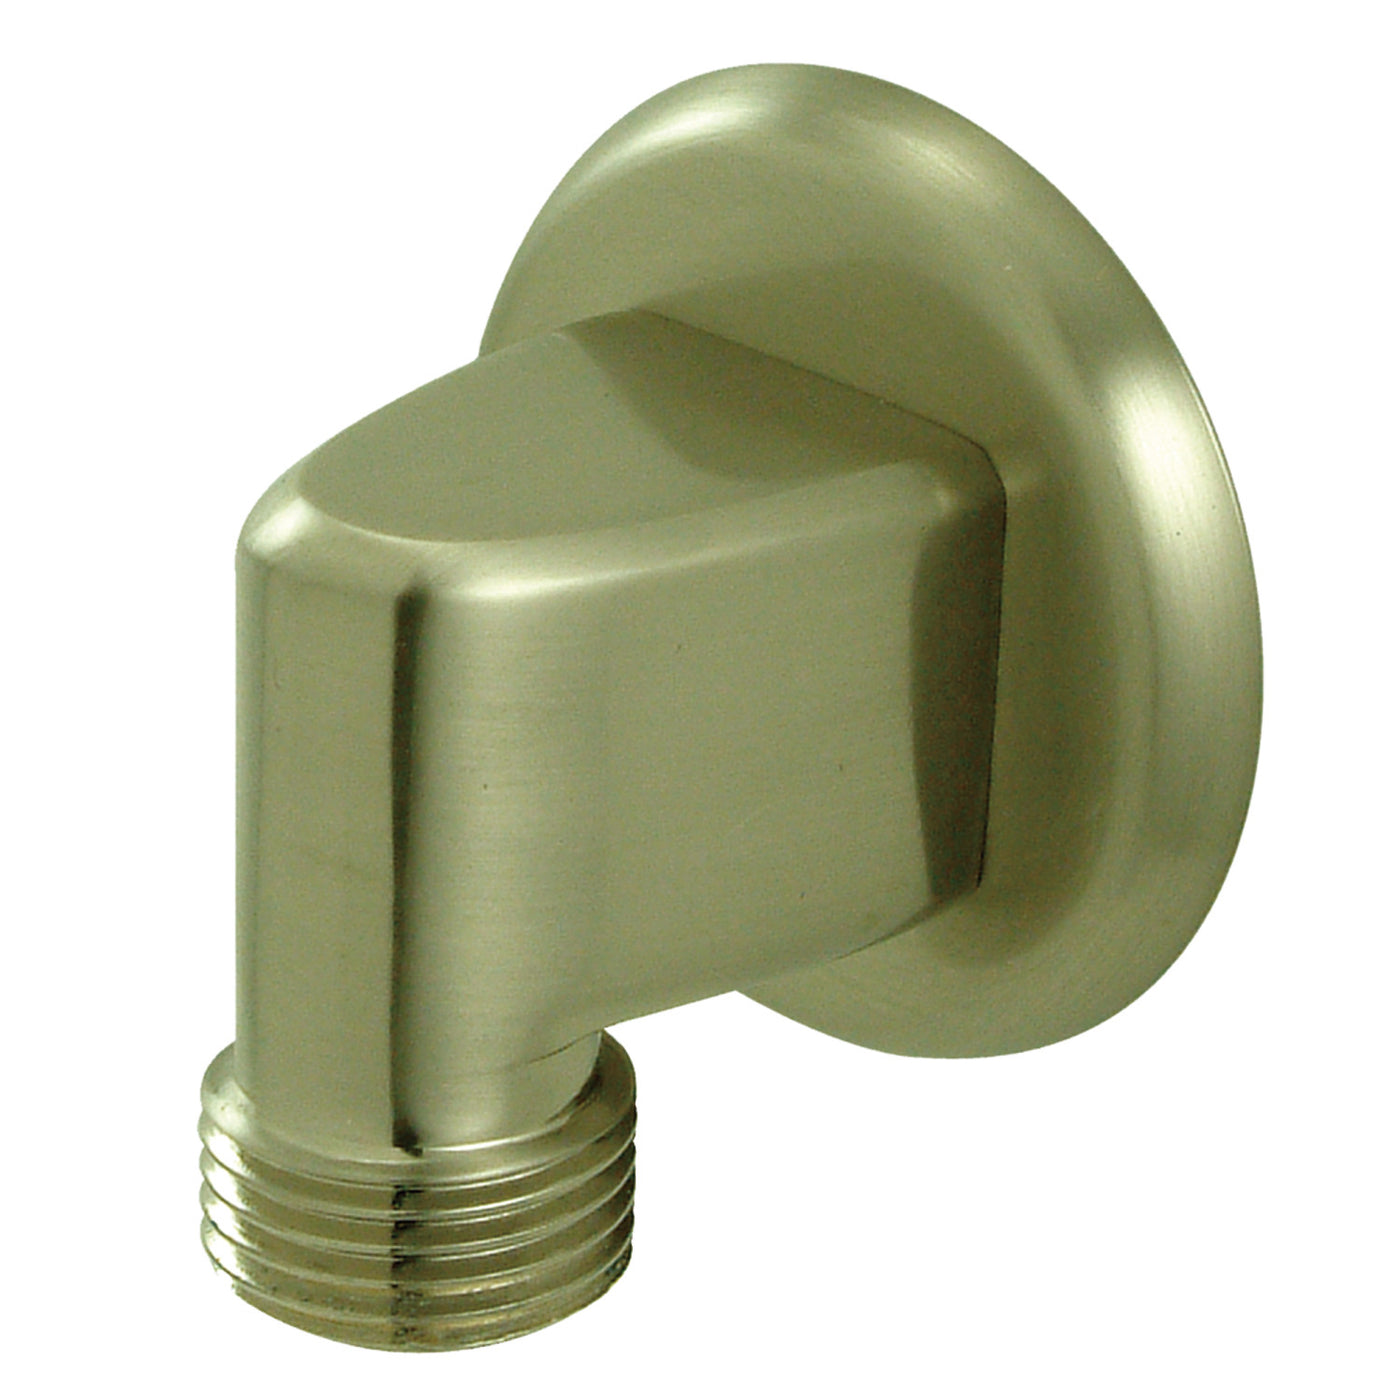 Elements of Design DK173A8 Wall Mount Supply Elbow, Brushed Nickel